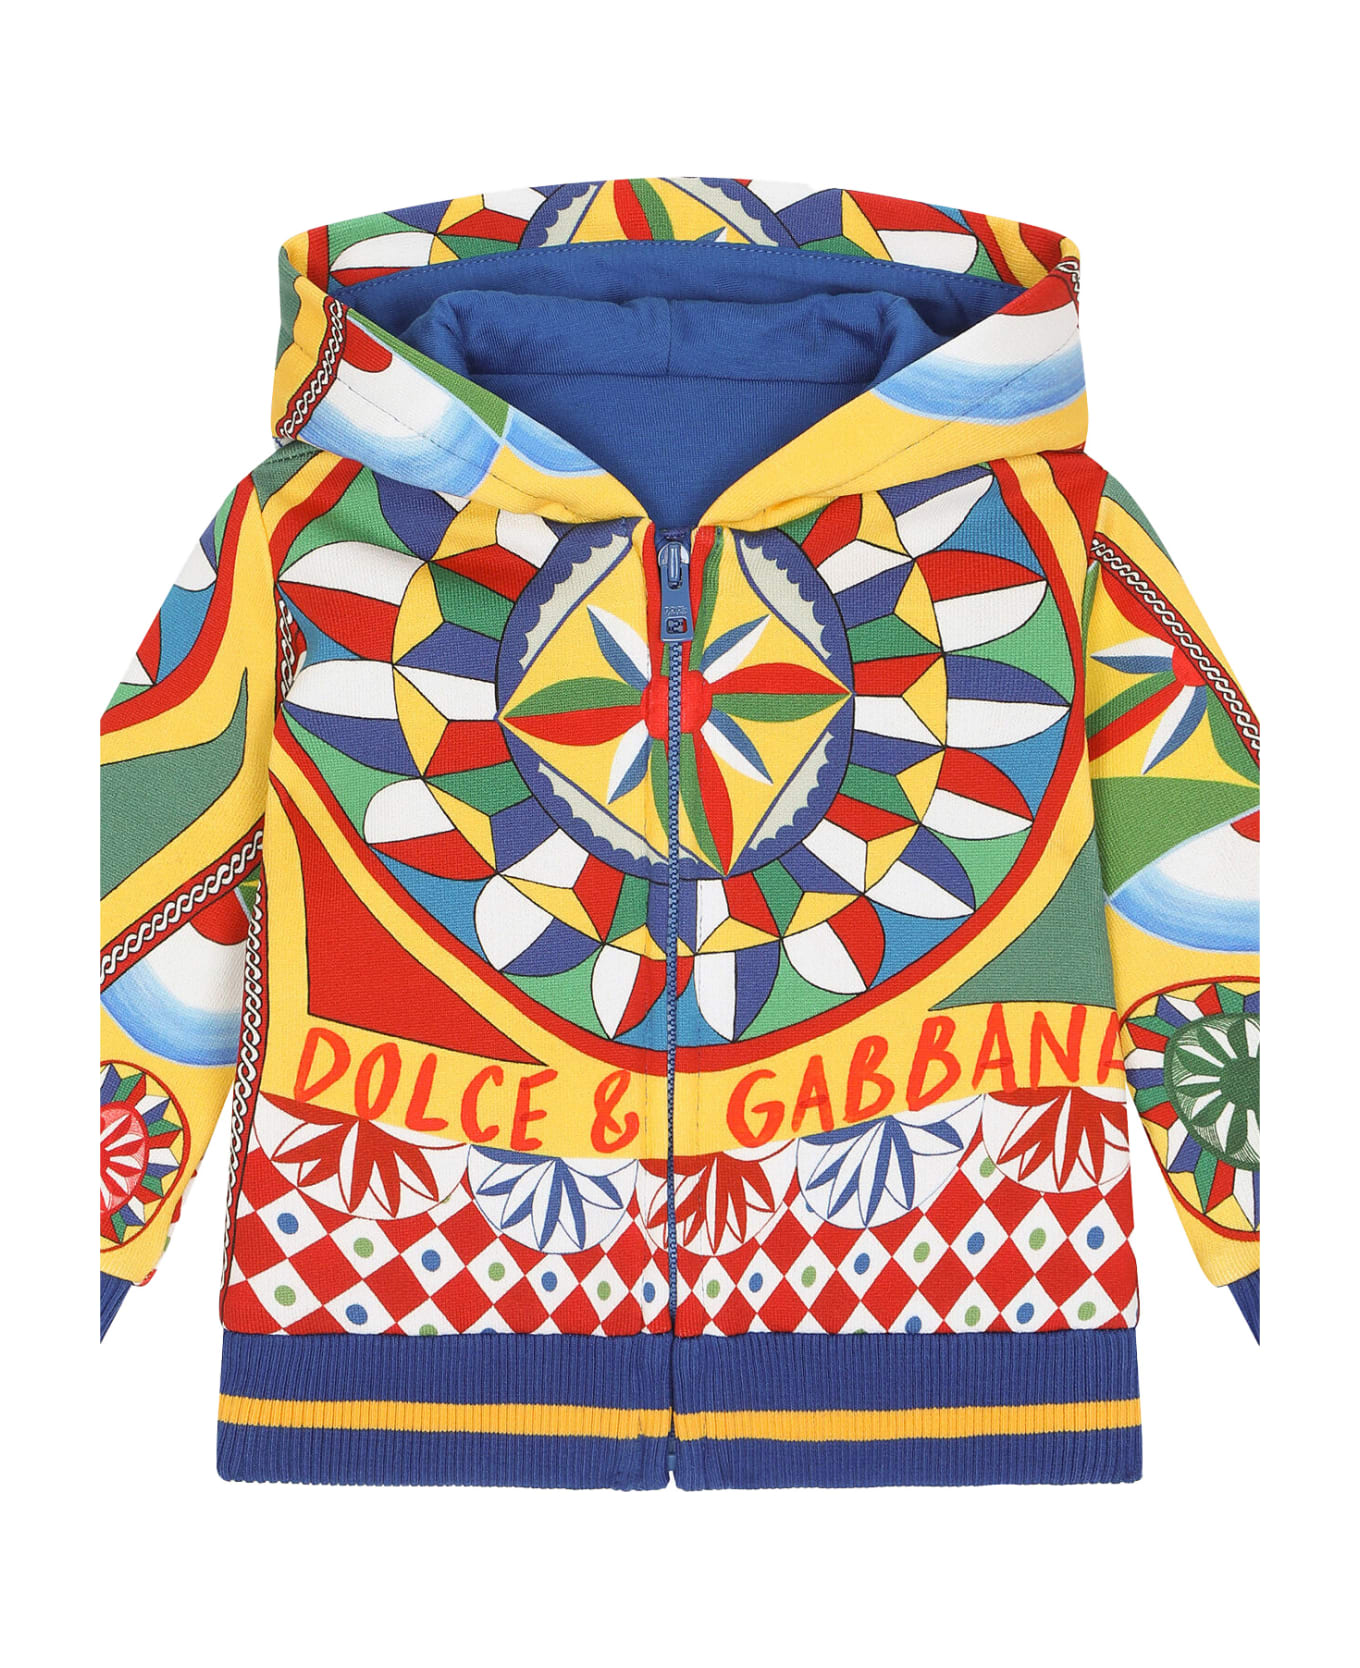 Dolce & Gabbana Cart Print Jersey Hoodie With Zip - Multicolour